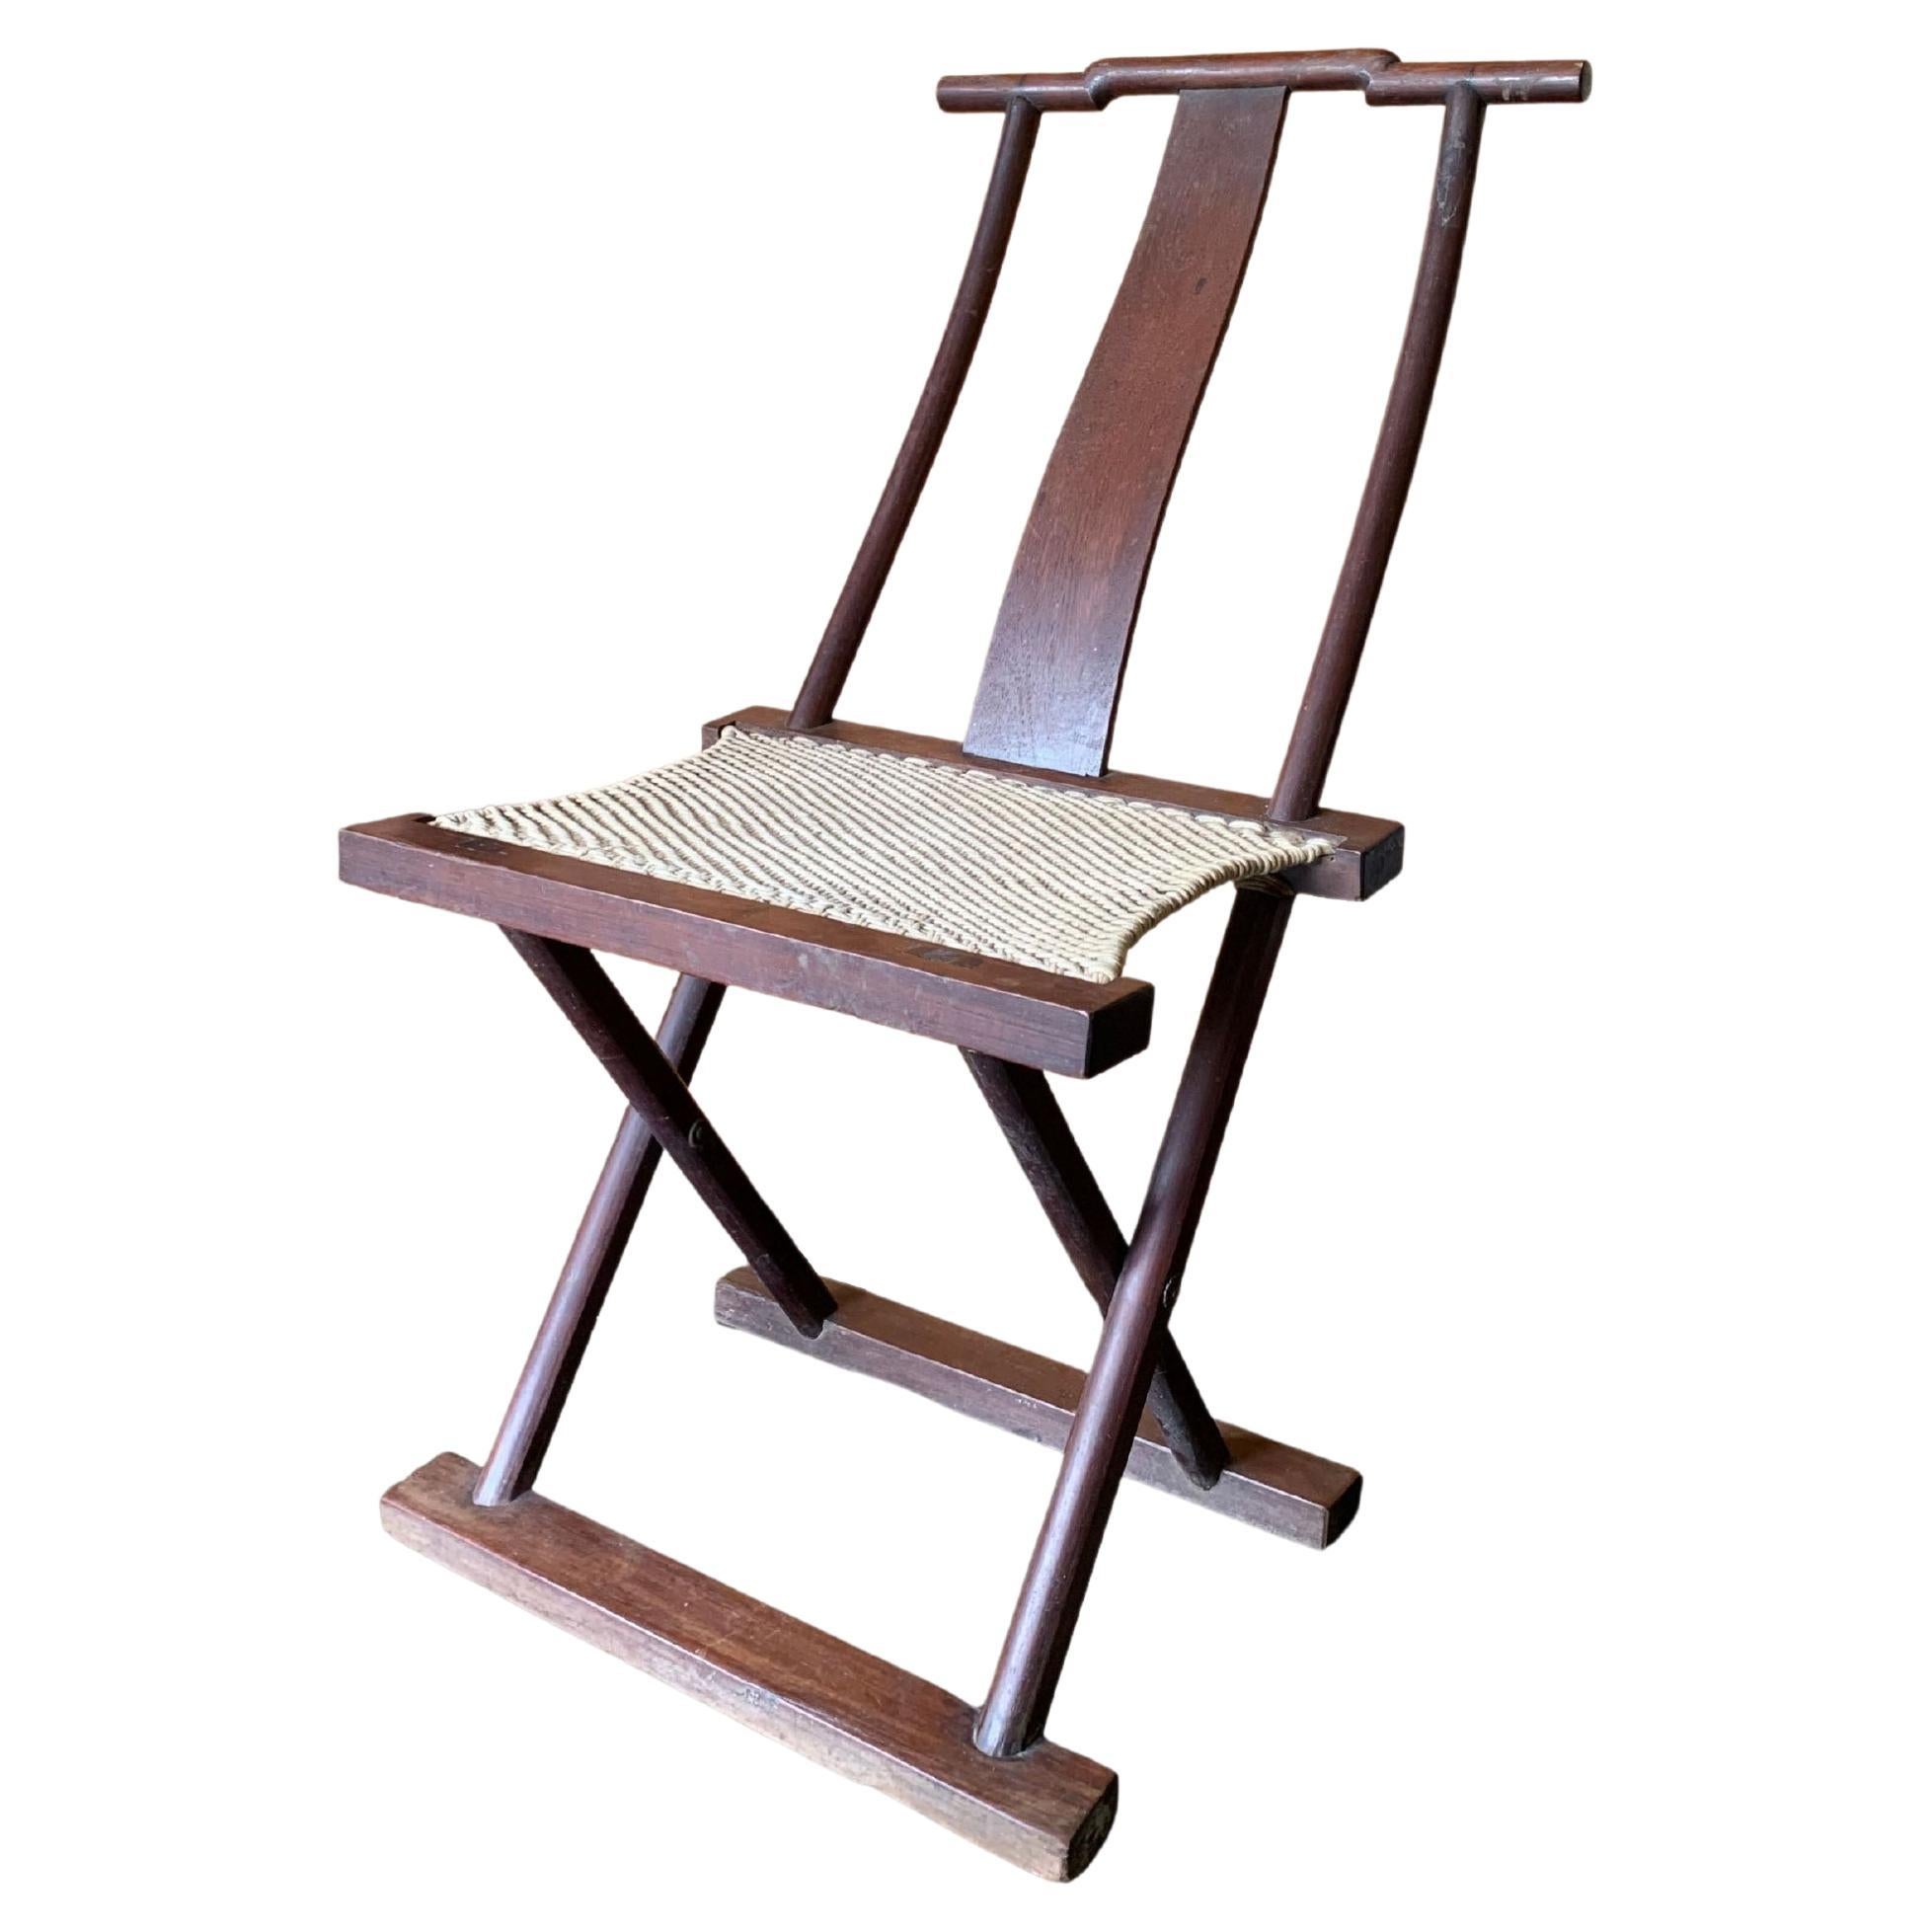 Antique Chinese Folding Chair with Woven Fabric Seat, c. 1900 For Sale